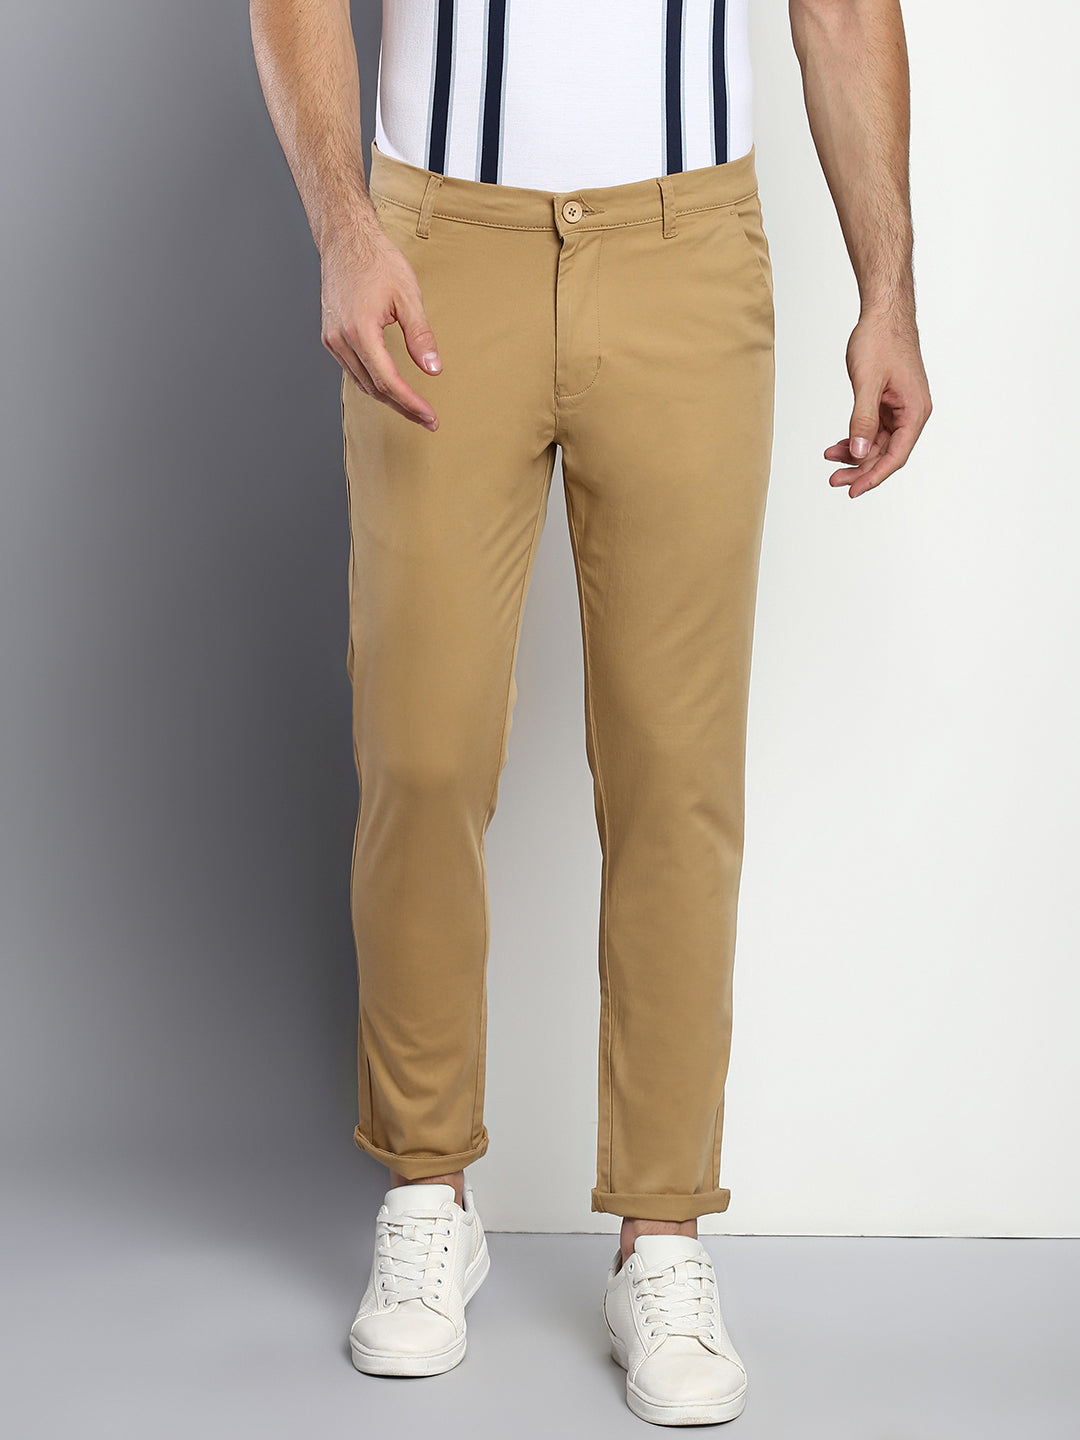 21 Beige Pants Outfits: What to Wear with Beige Pants